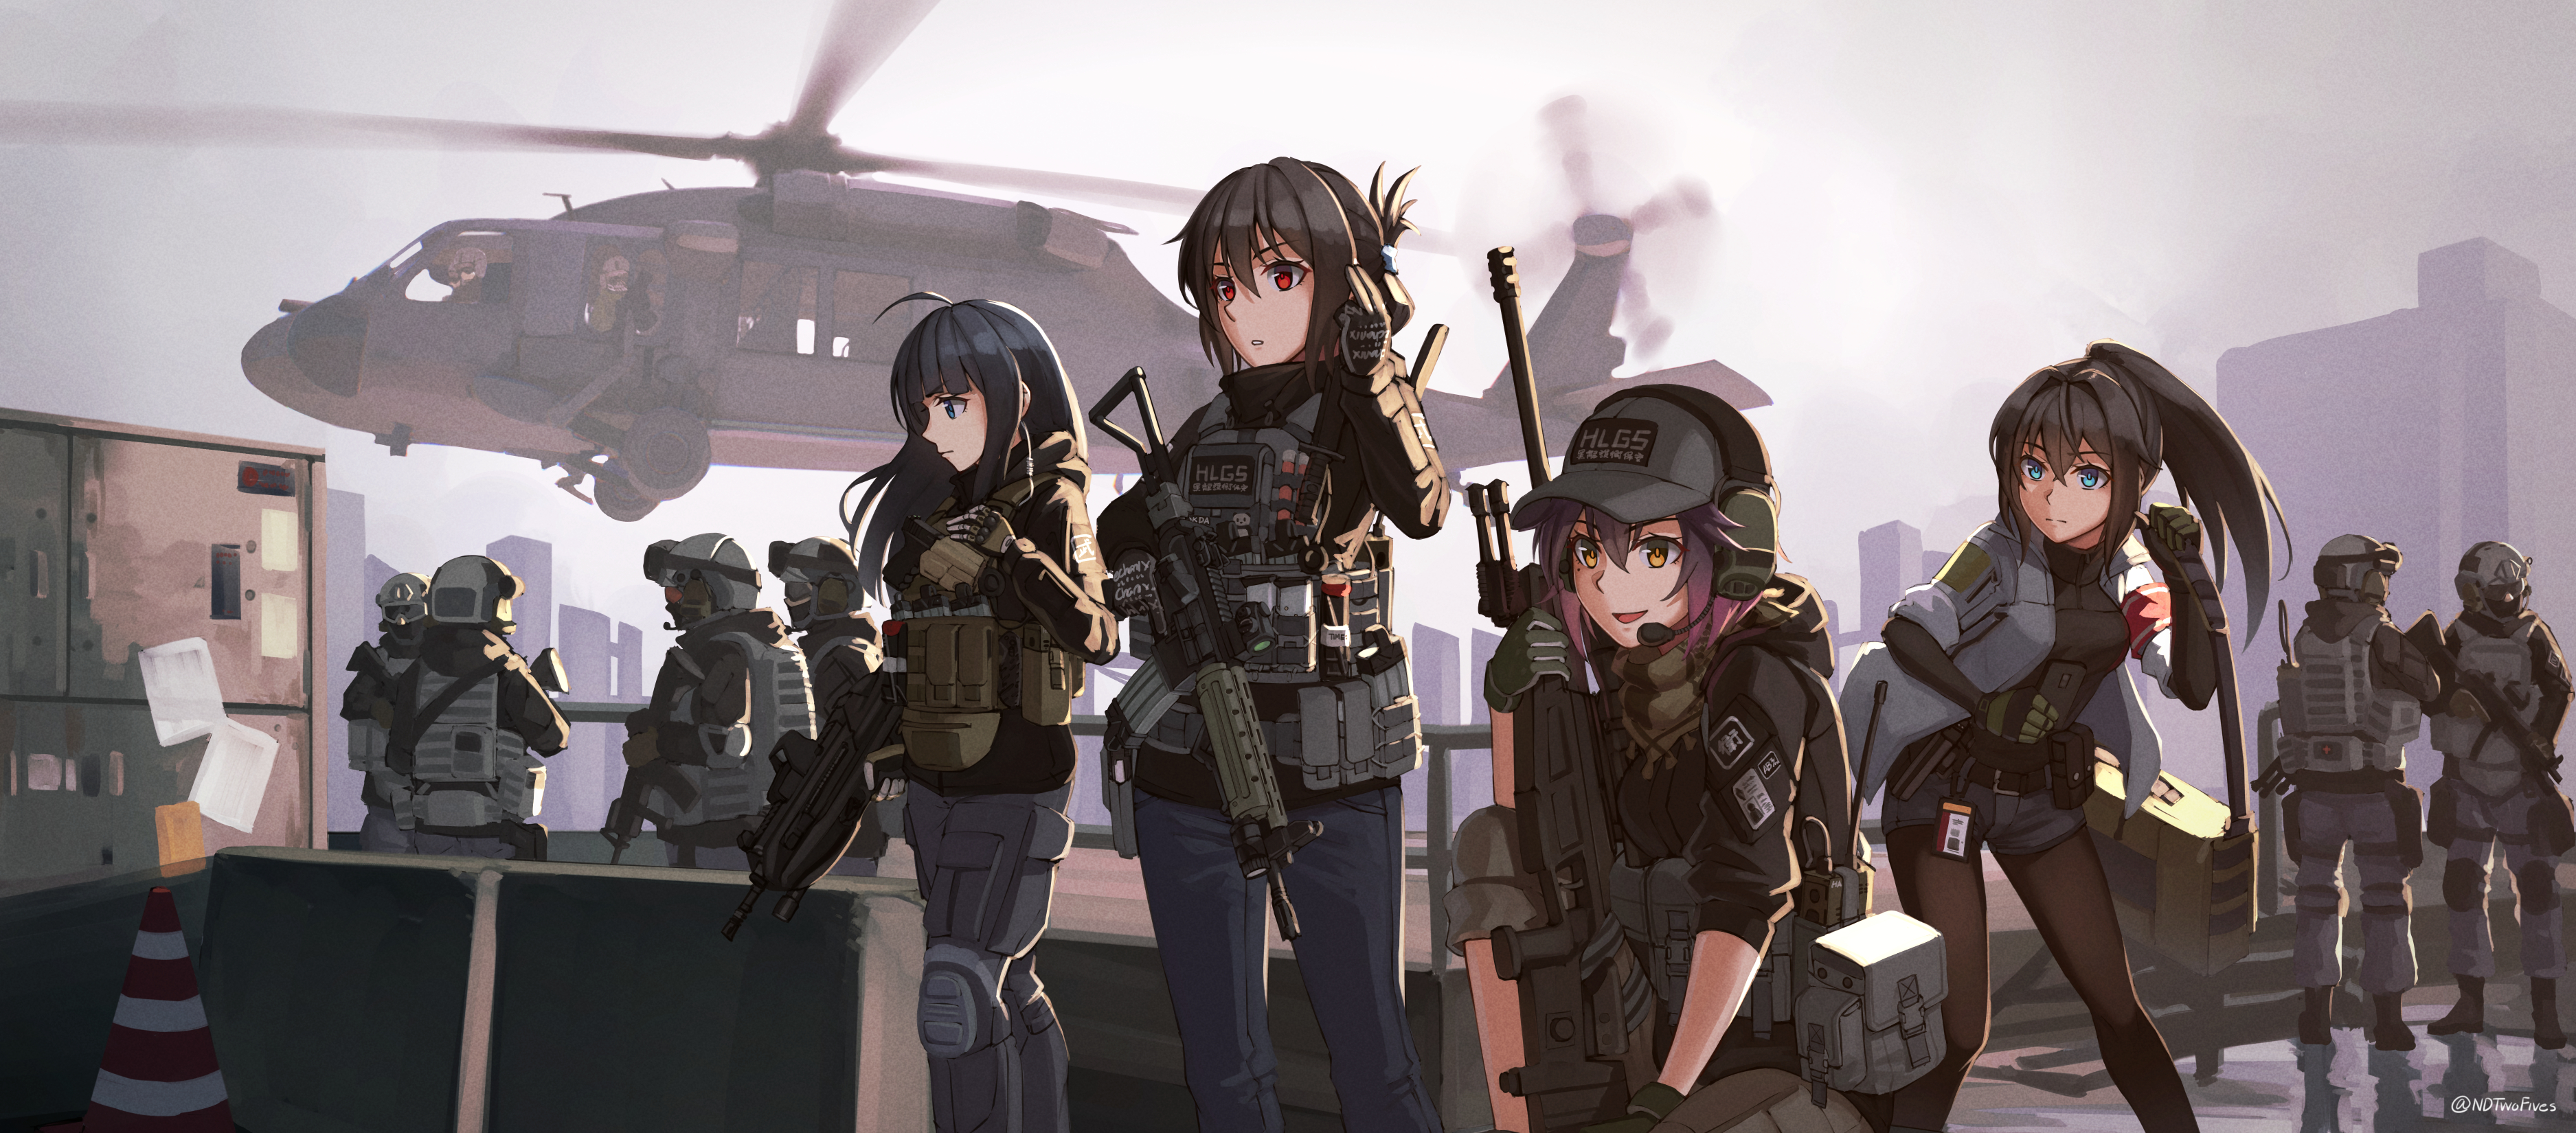 Girls armed with firearms by 狗仔哥